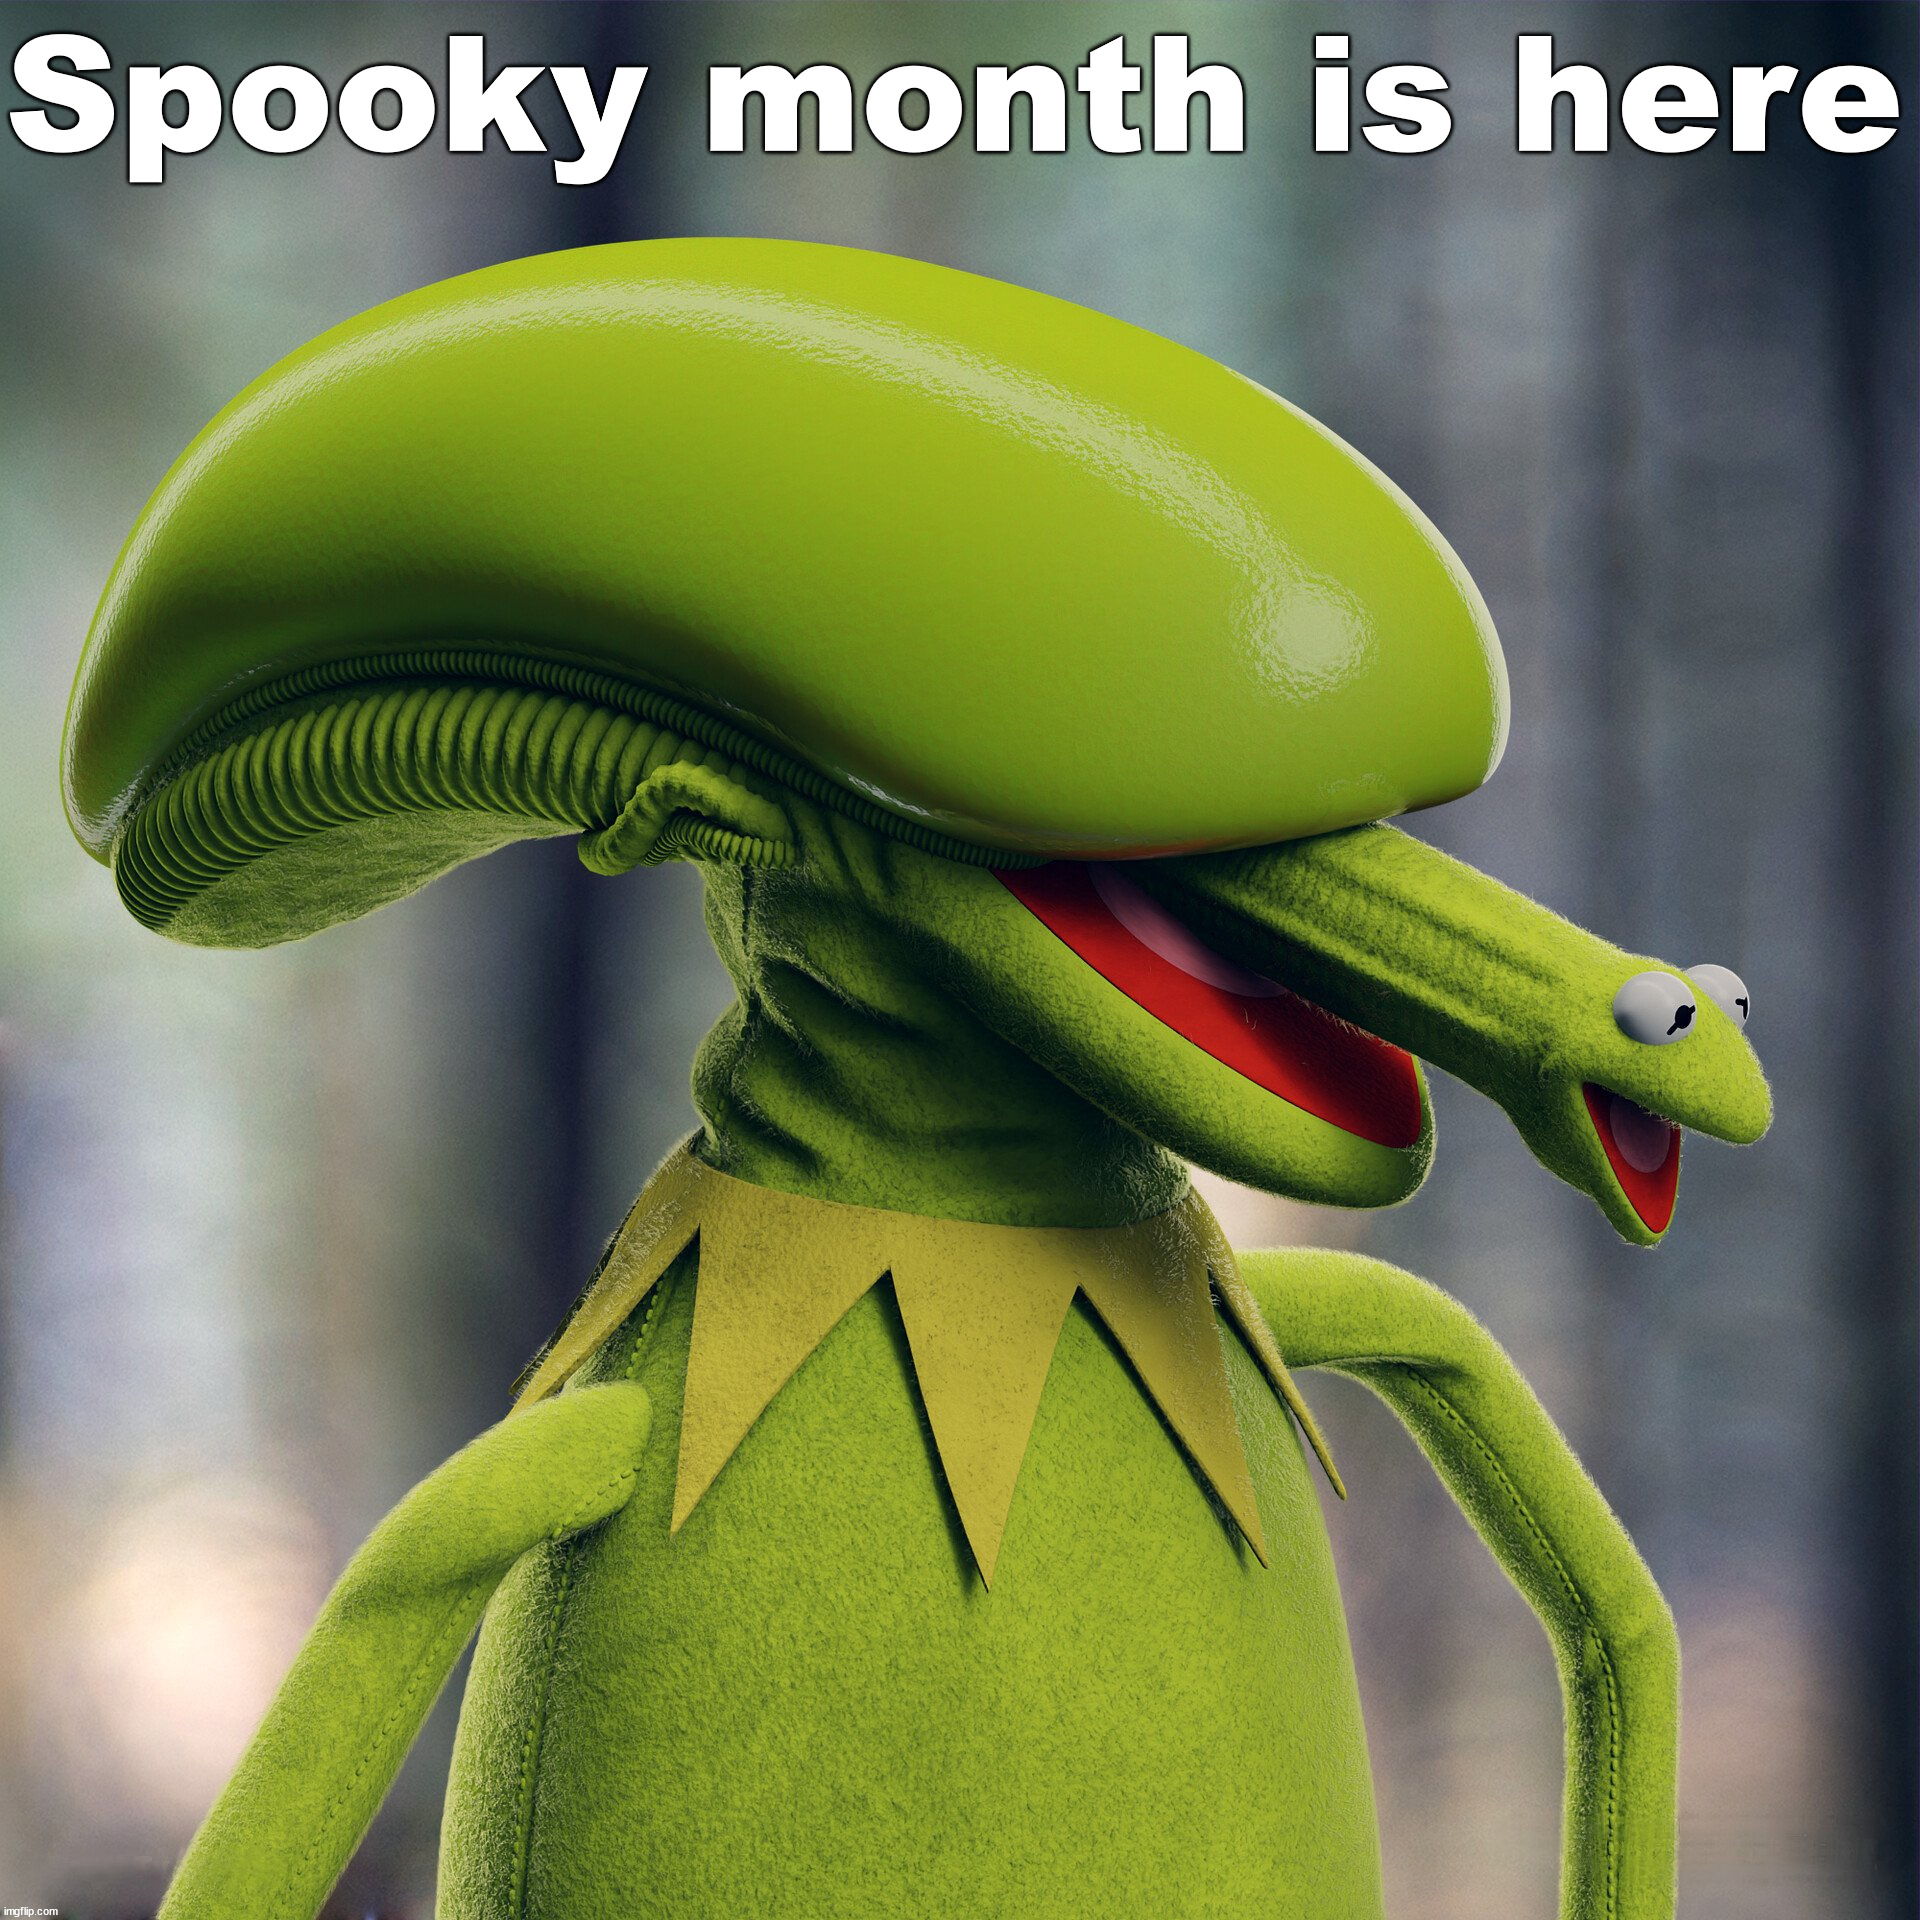 Spooky month is here | image tagged in cursed image | made w/ Imgflip meme maker